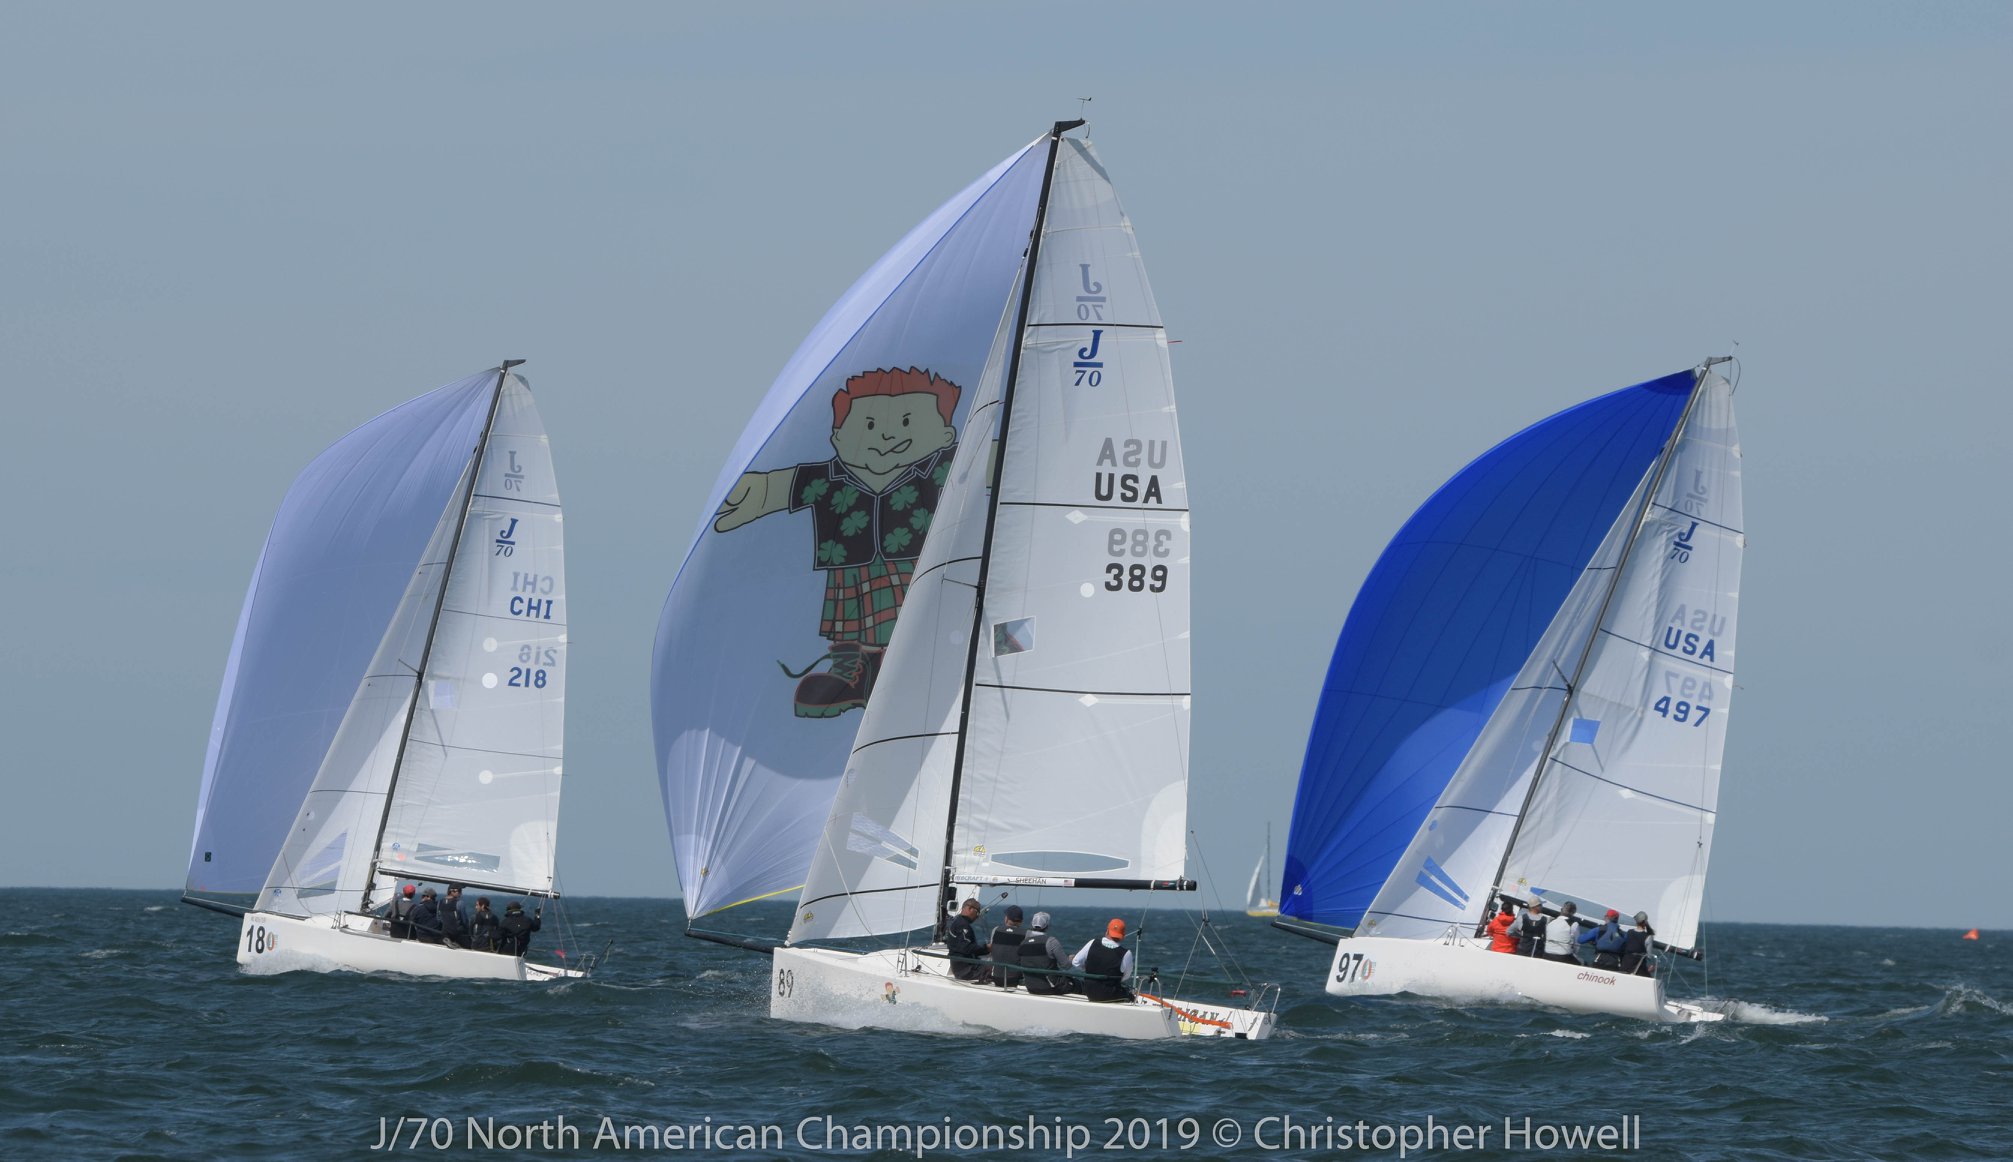  J/70  J/70 North American Championship  Cleveland, OH  Day 4  Final results  Clear victory for Oivind Lorentzen Greenwich, CT